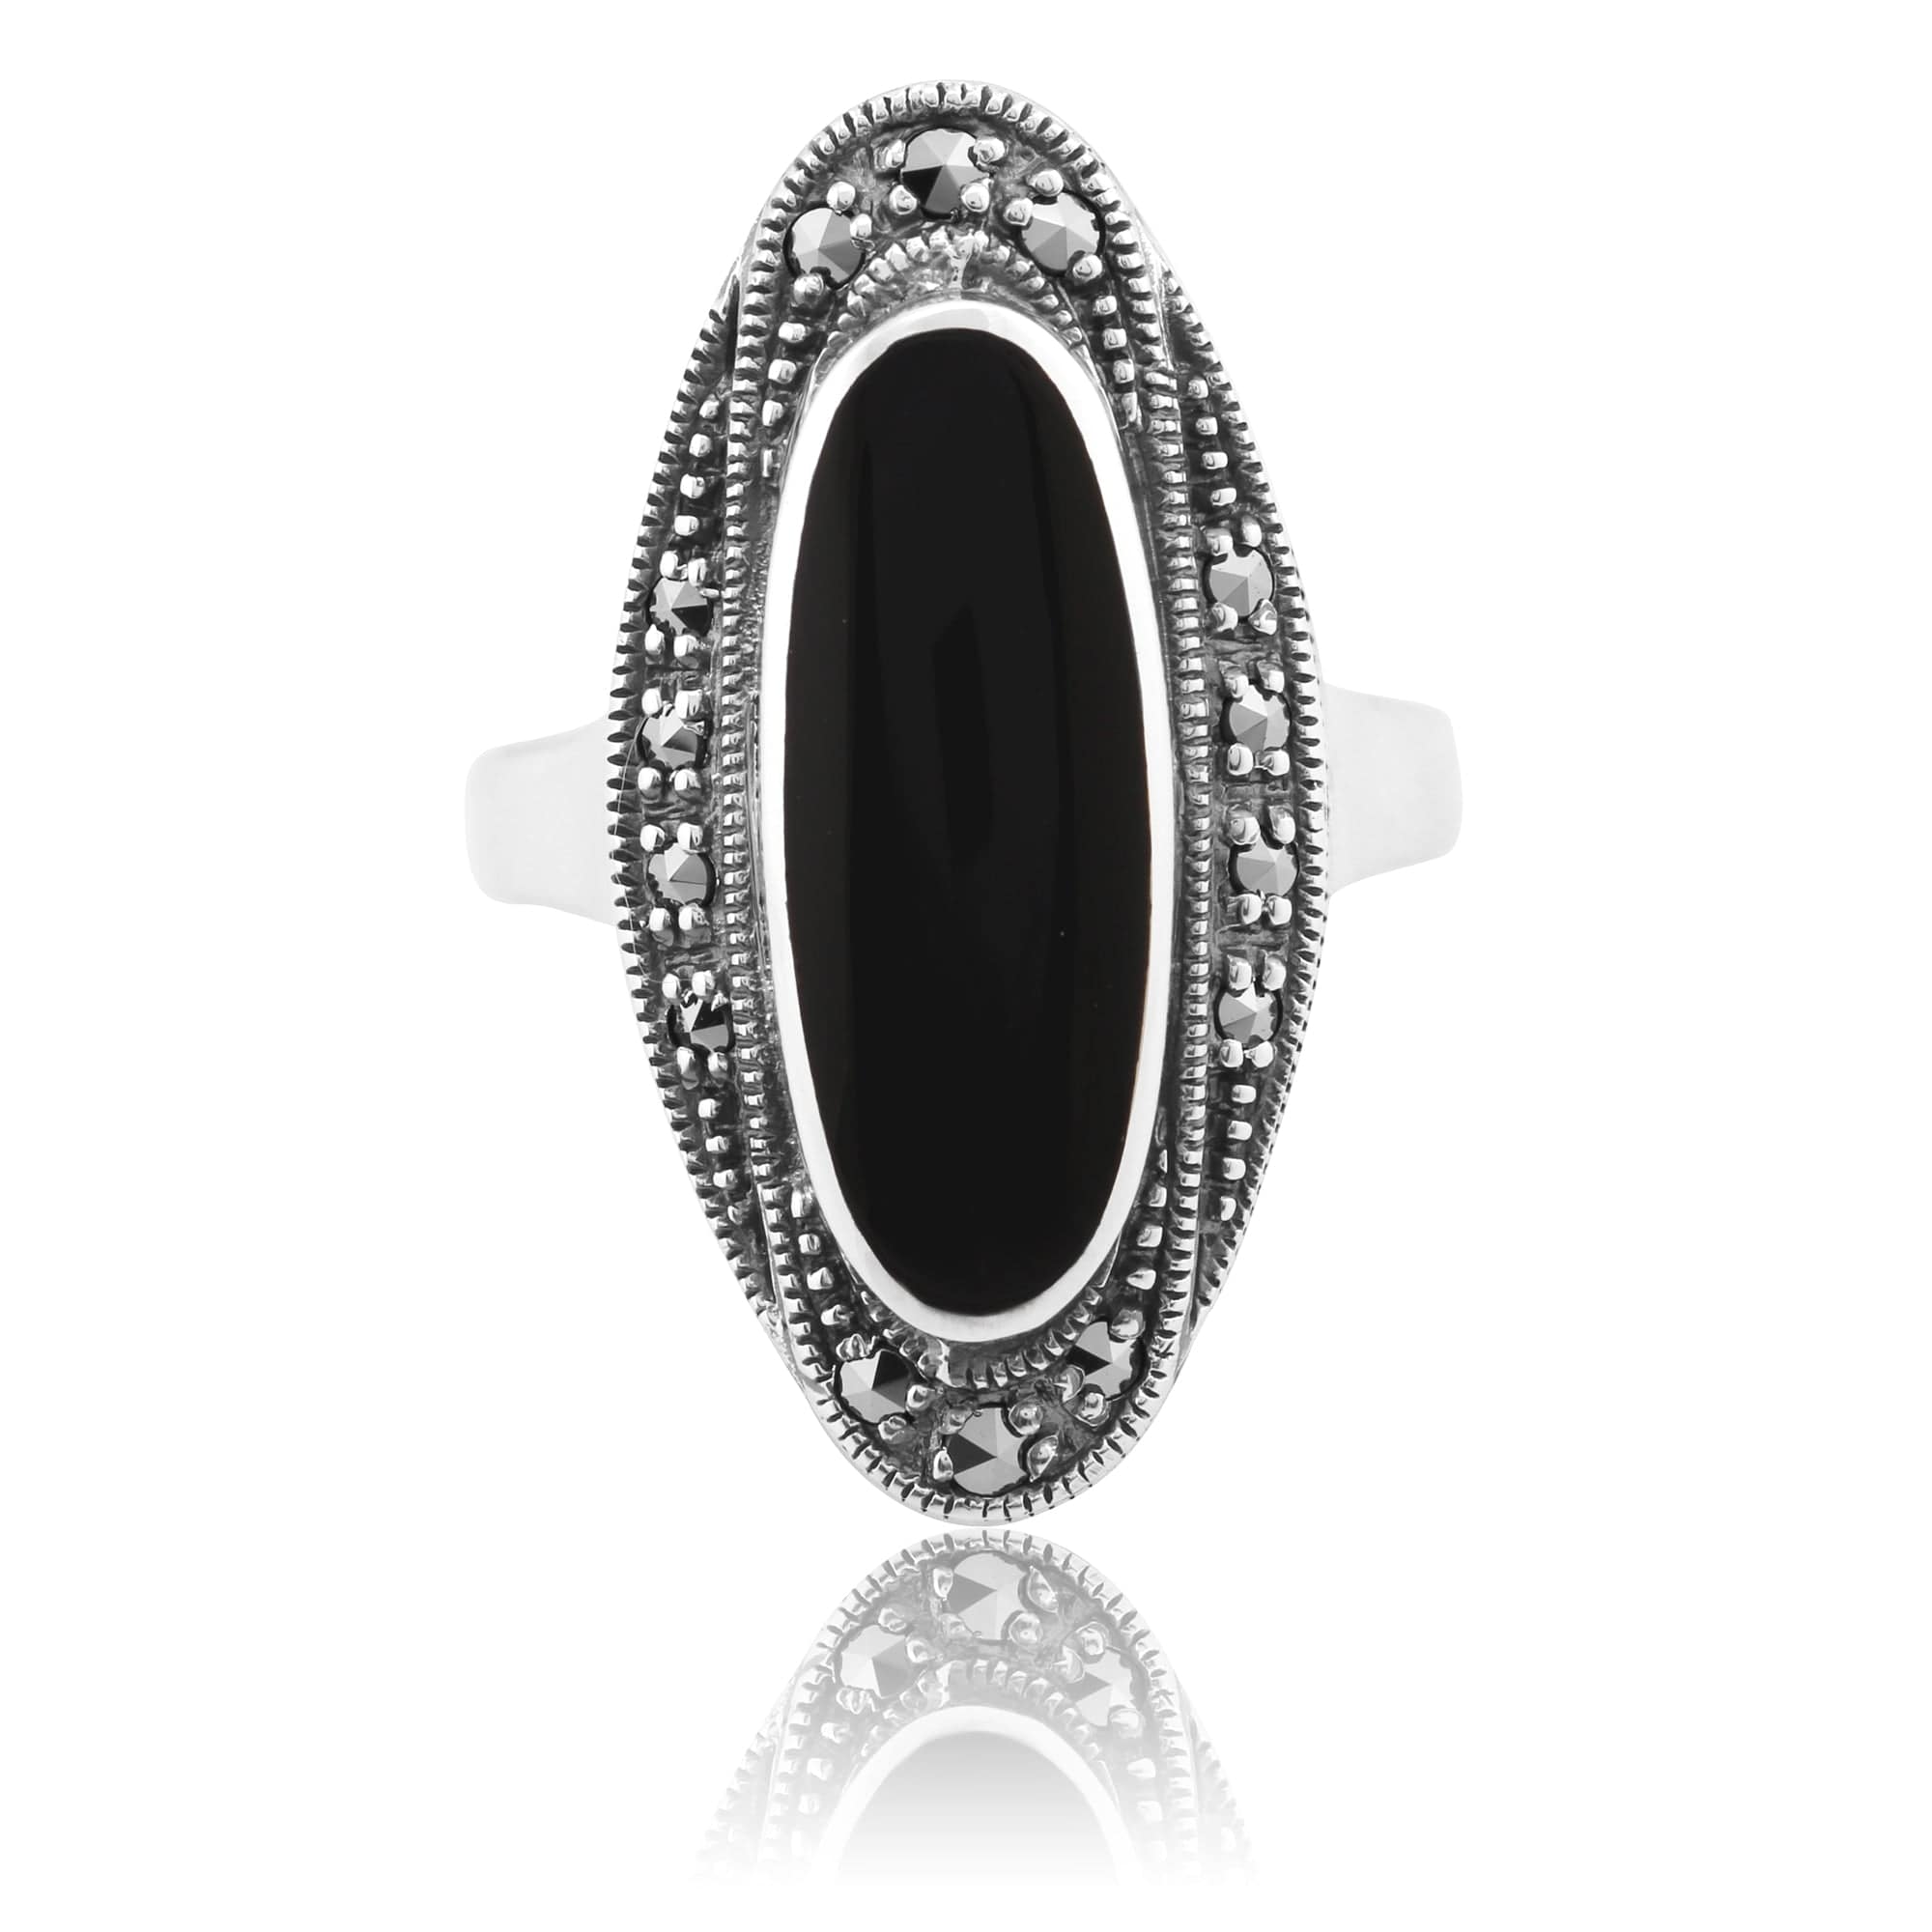 19757 Art Deco Style Black Onyx Cabochon & Marcasite Ring in 925 Sterling Silver 3